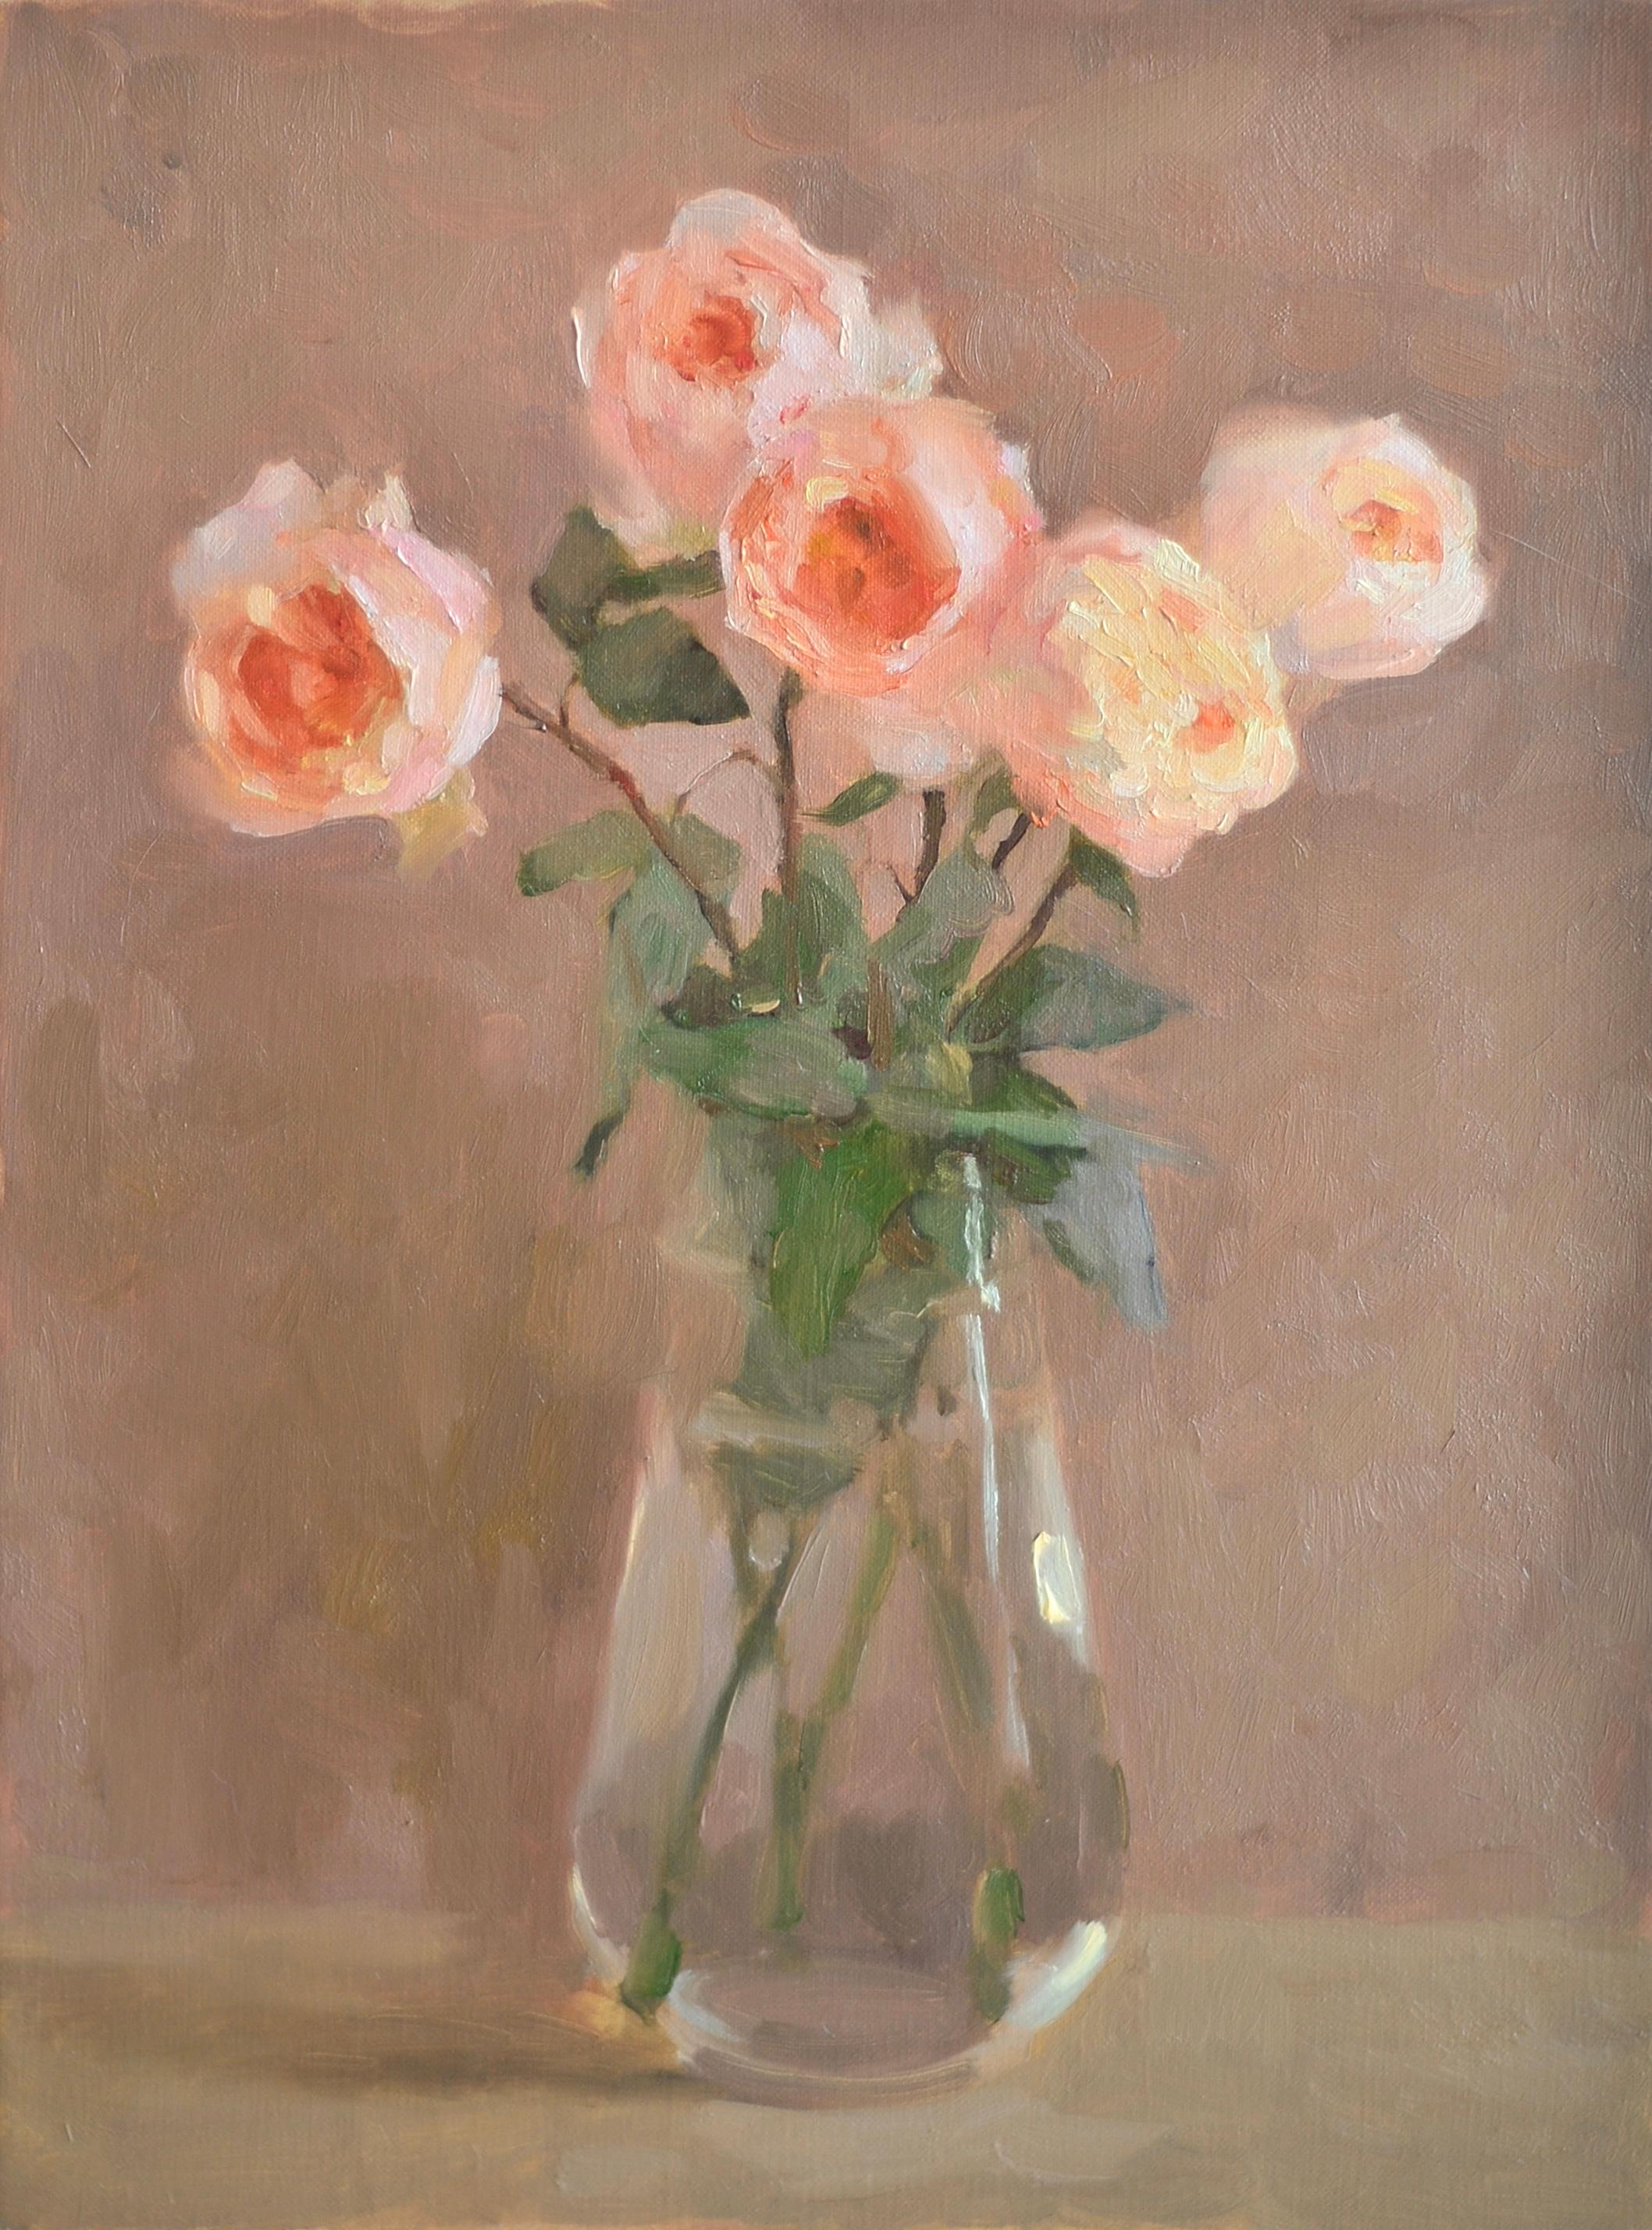 Roses in a Glass Vase - 21st Century Contemporary Still Life Floral Oil Painting